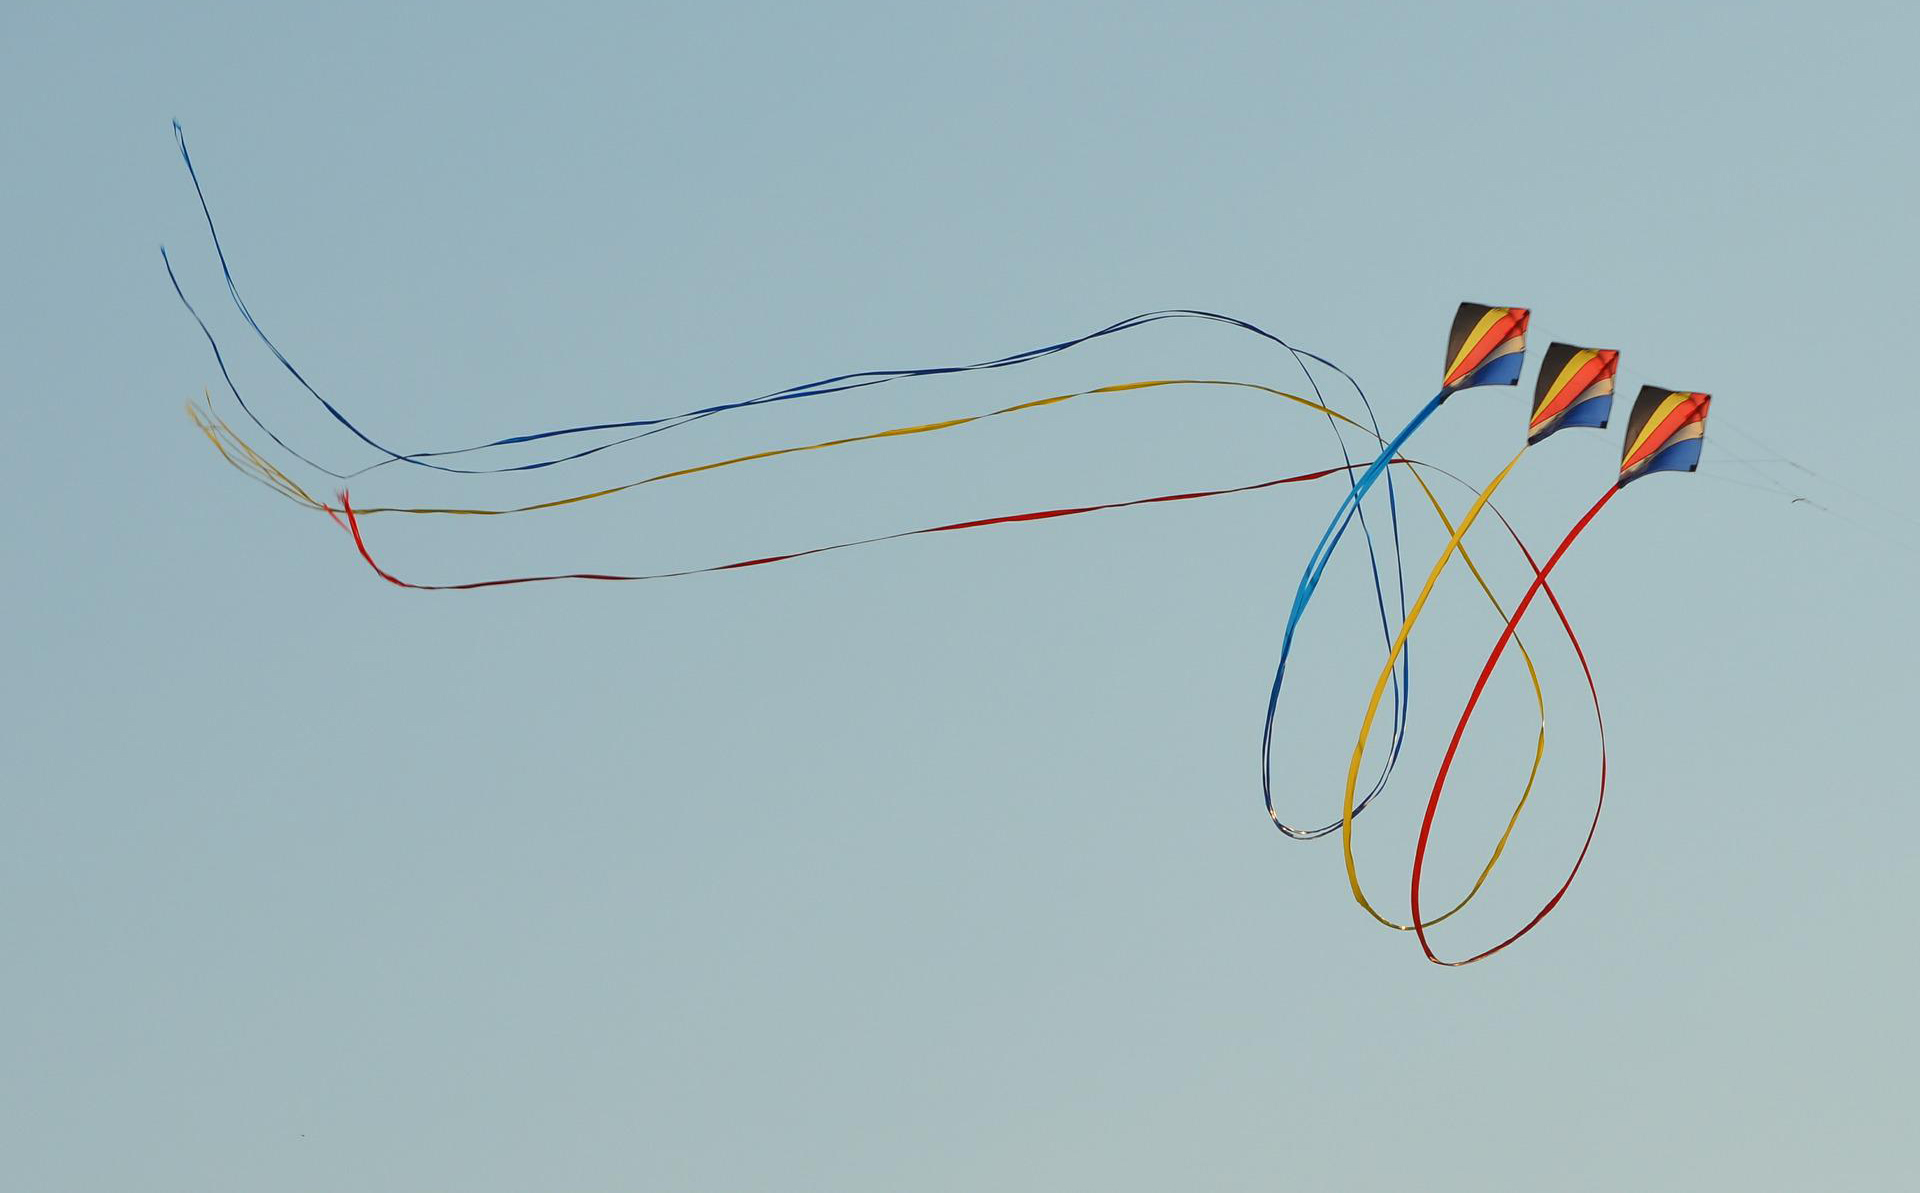 Three multi-coloured kites flying in unison in a blue sky